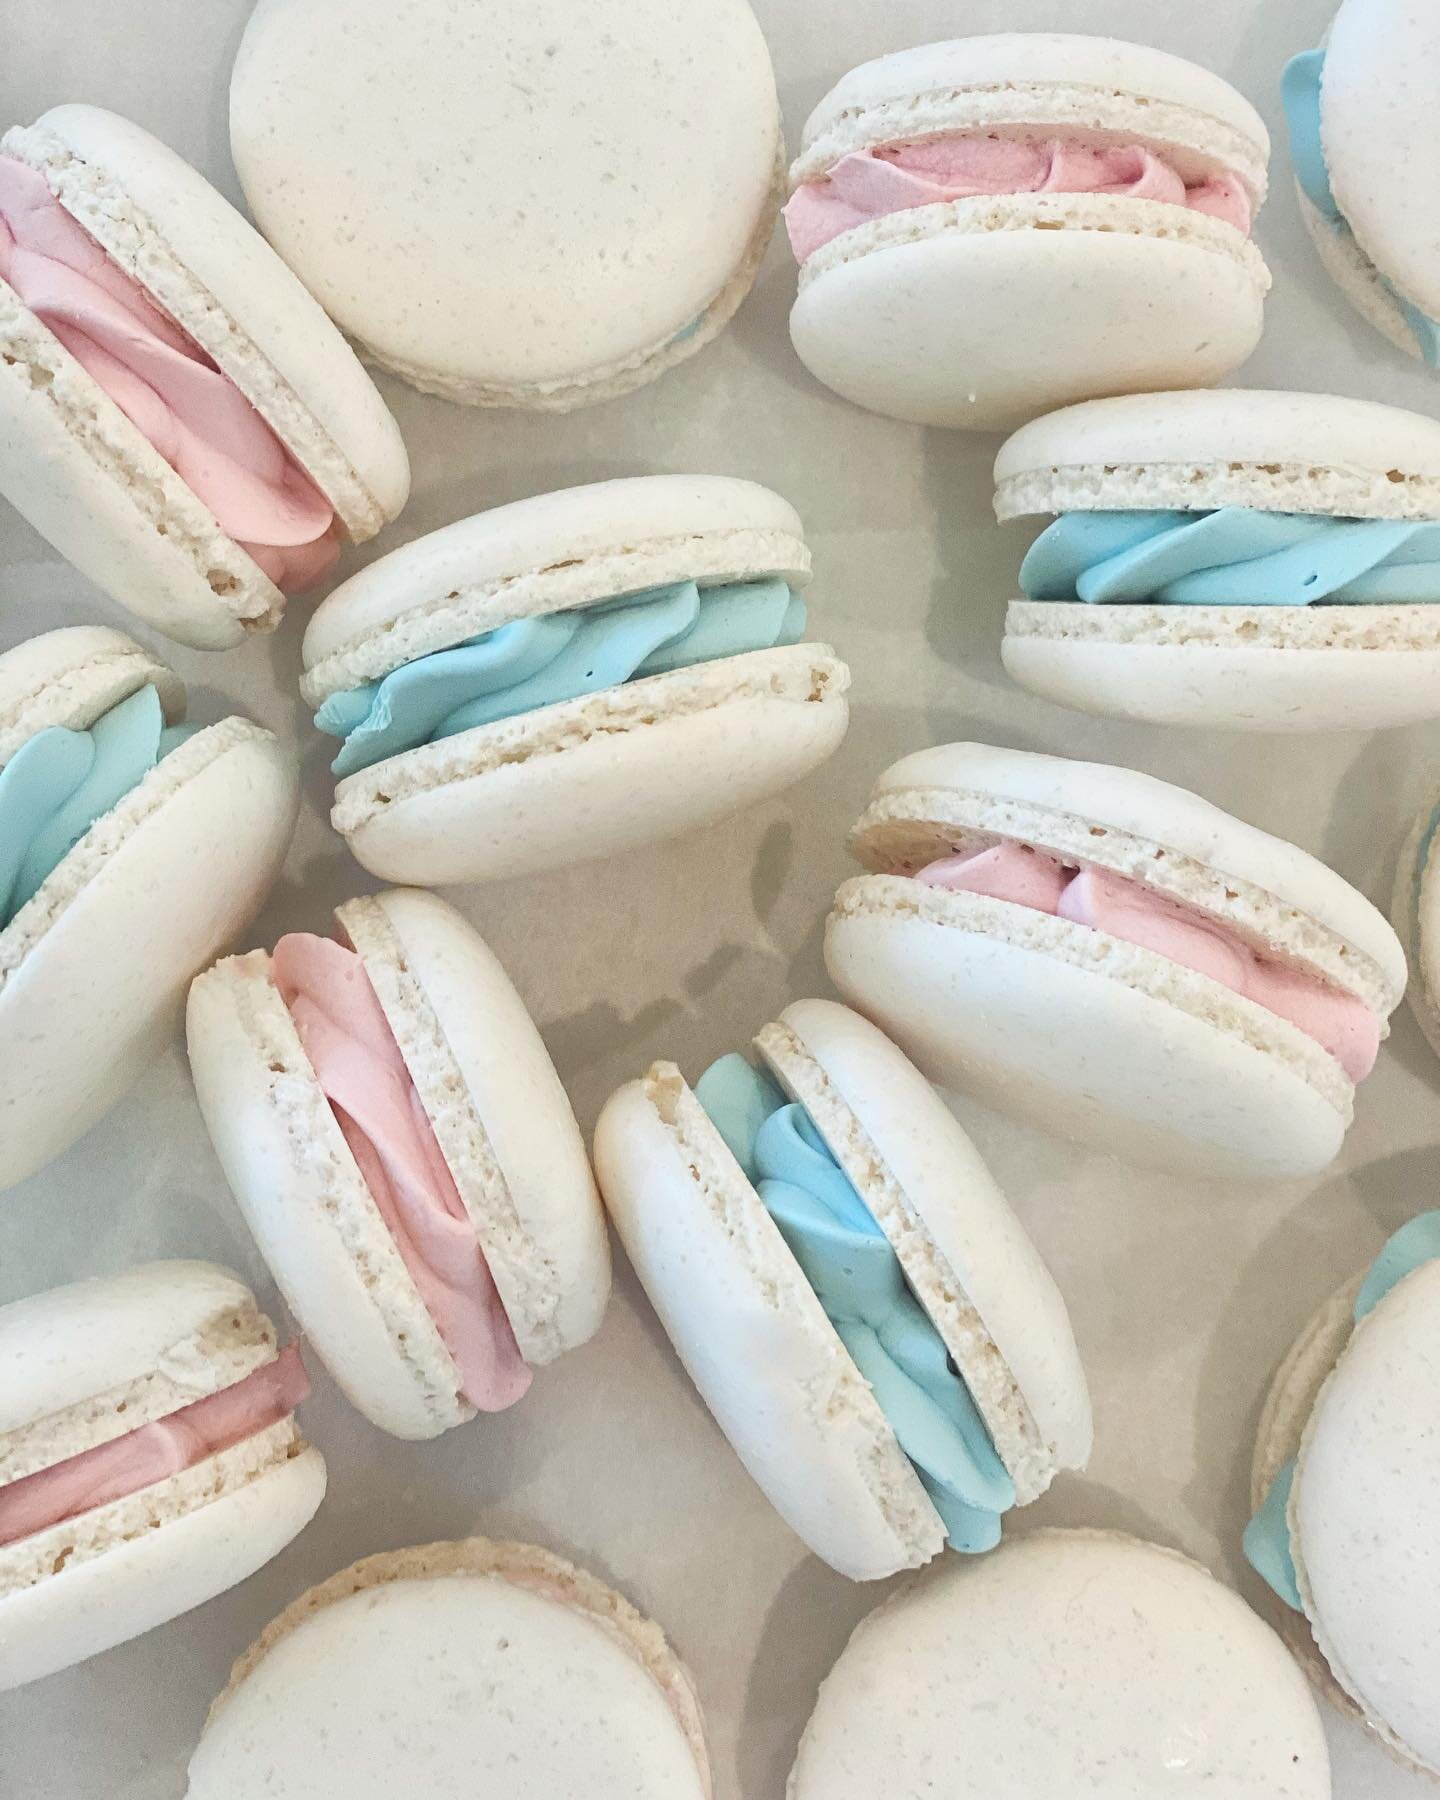 Macarons for a gender reveal cake that went out the door today&hellip;what will baby bee? #genderrevealcake #macaronlover #macaronart #melbournebaker #melbournecake #cakescakescakes #melbournemacarons #italianmacarons #instamacarons #genderrevealcake